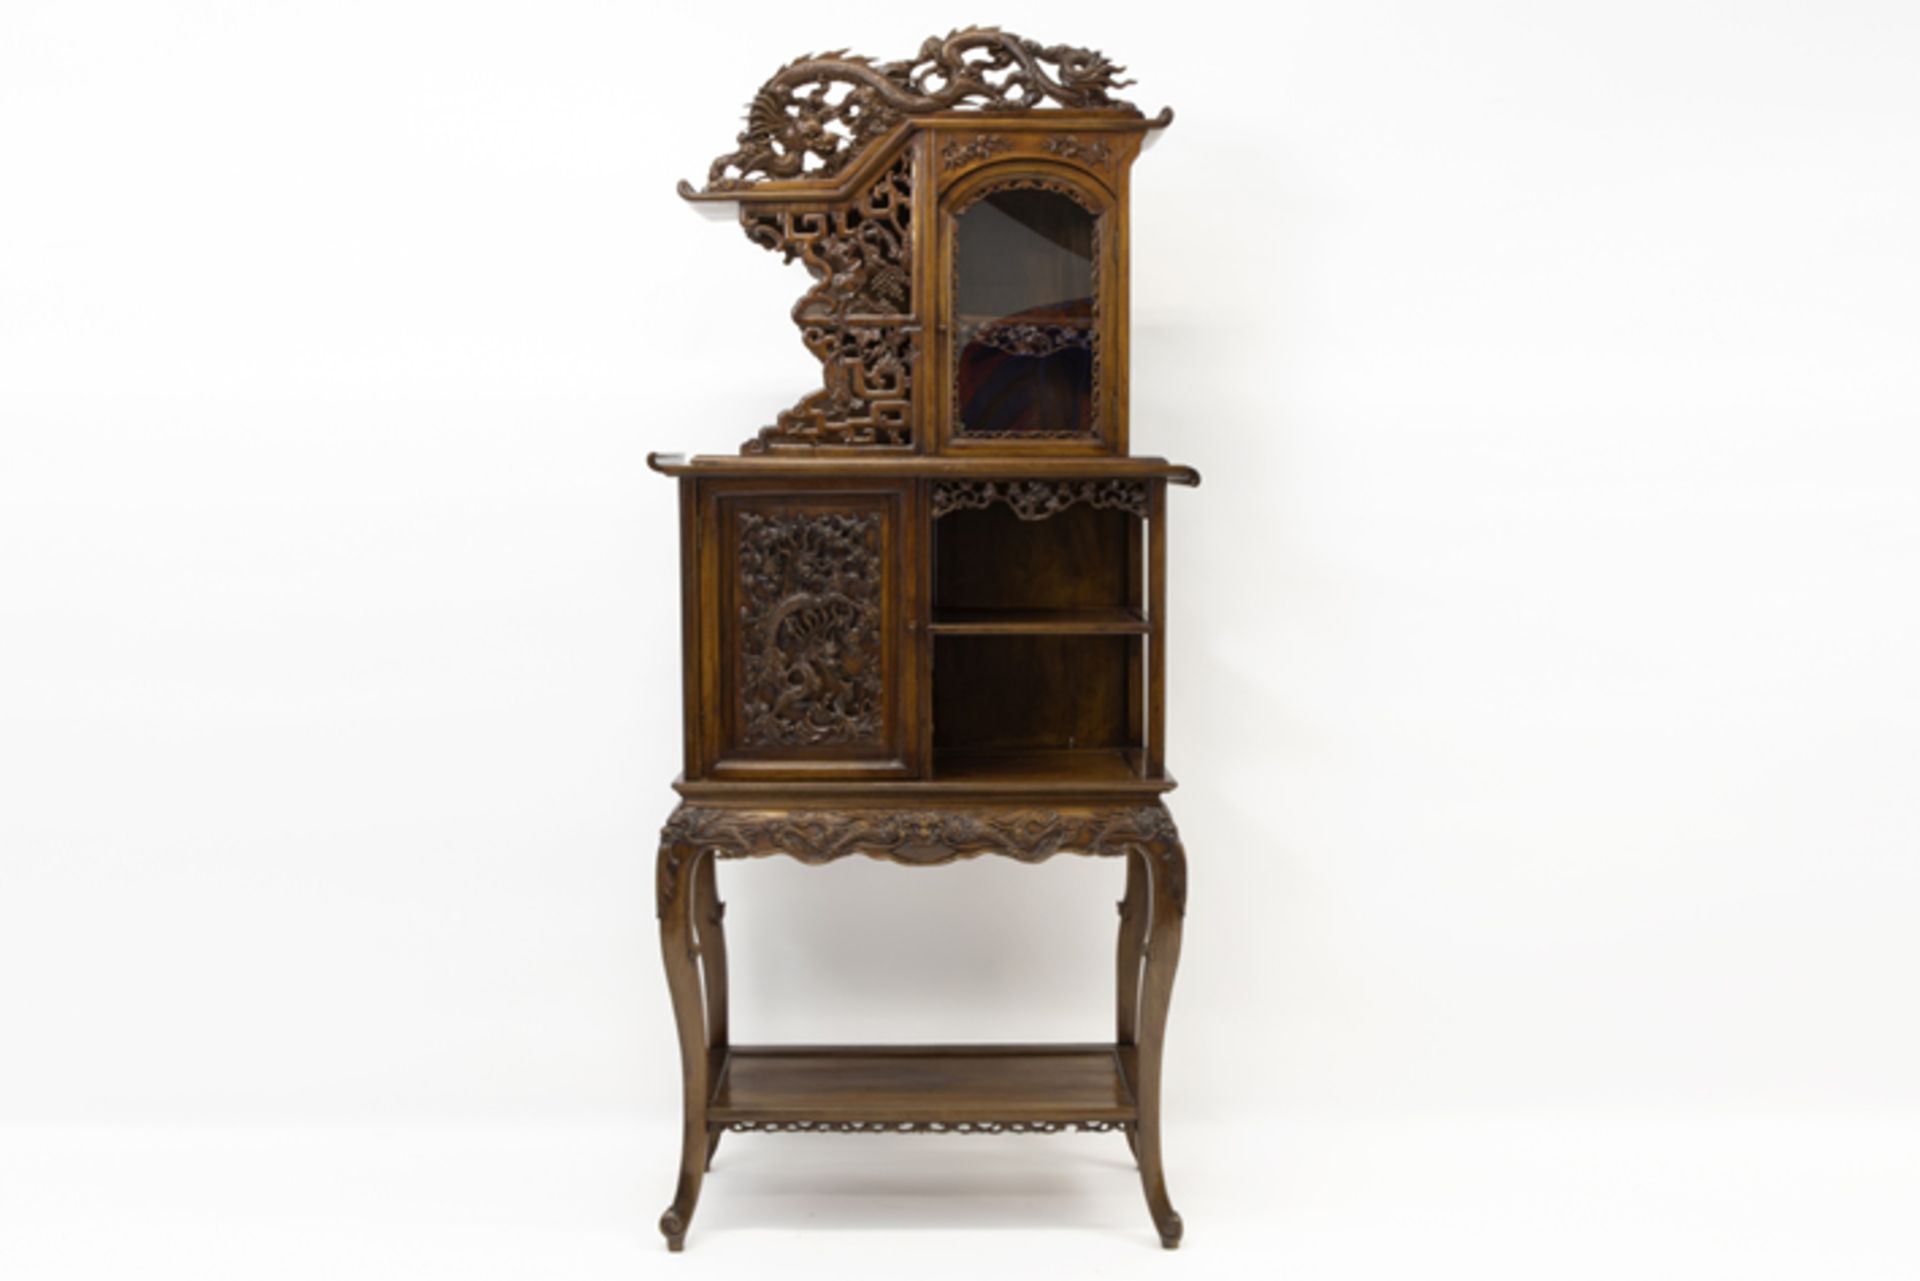 antique Chinese cabinet in an richly ornamentated exotic wood species with finely sculpted motifs